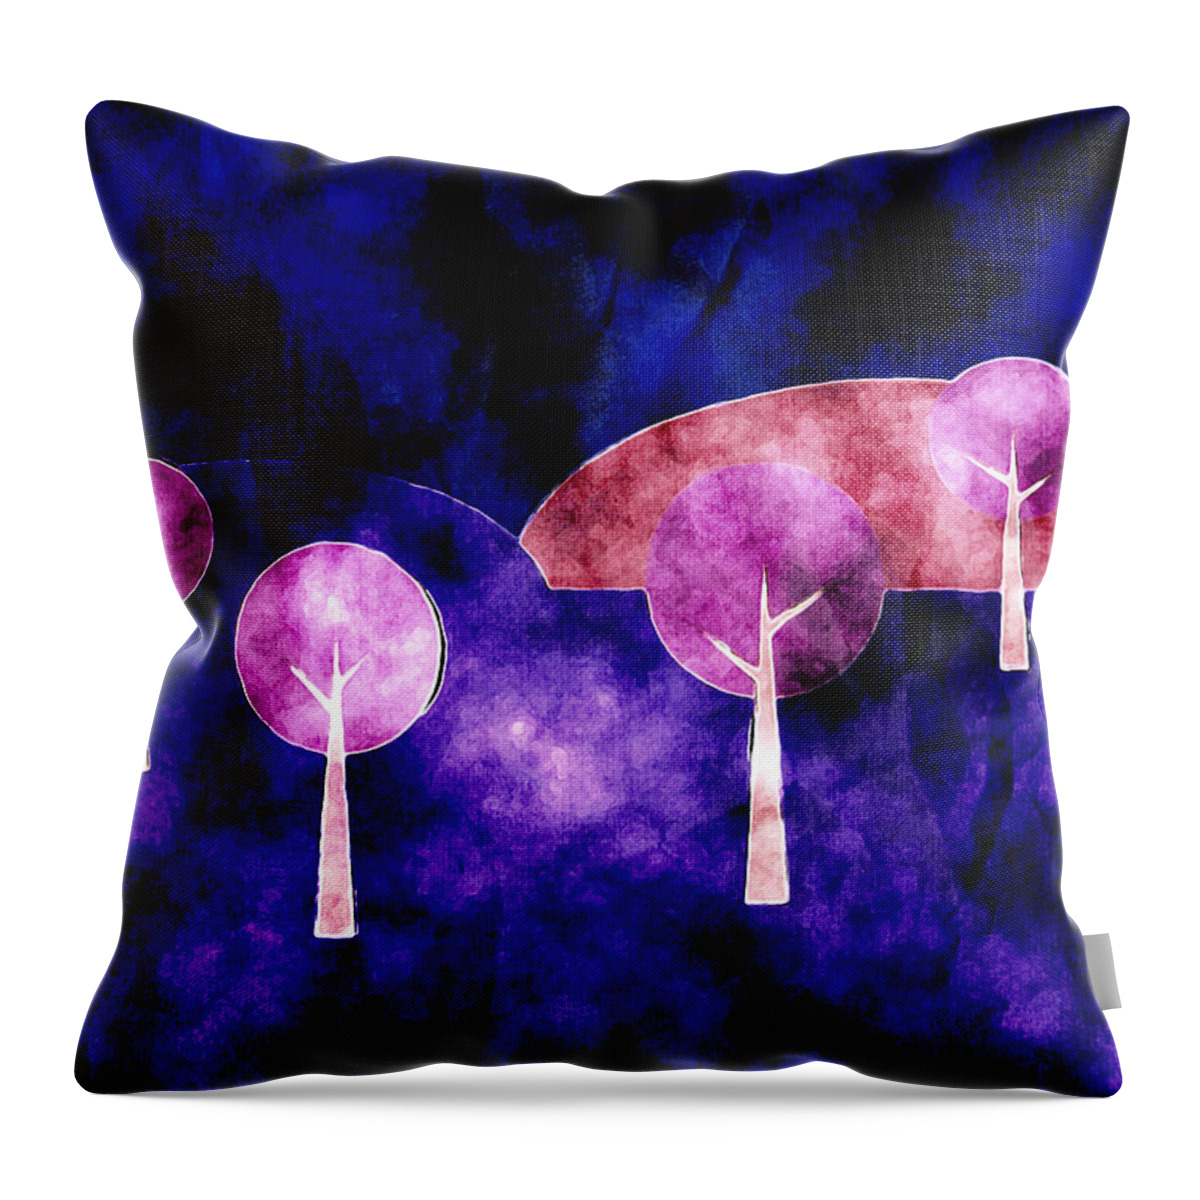 Hills Throw Pillow featuring the digital art Abstract Textural Trees And Hills by Phil Perkins